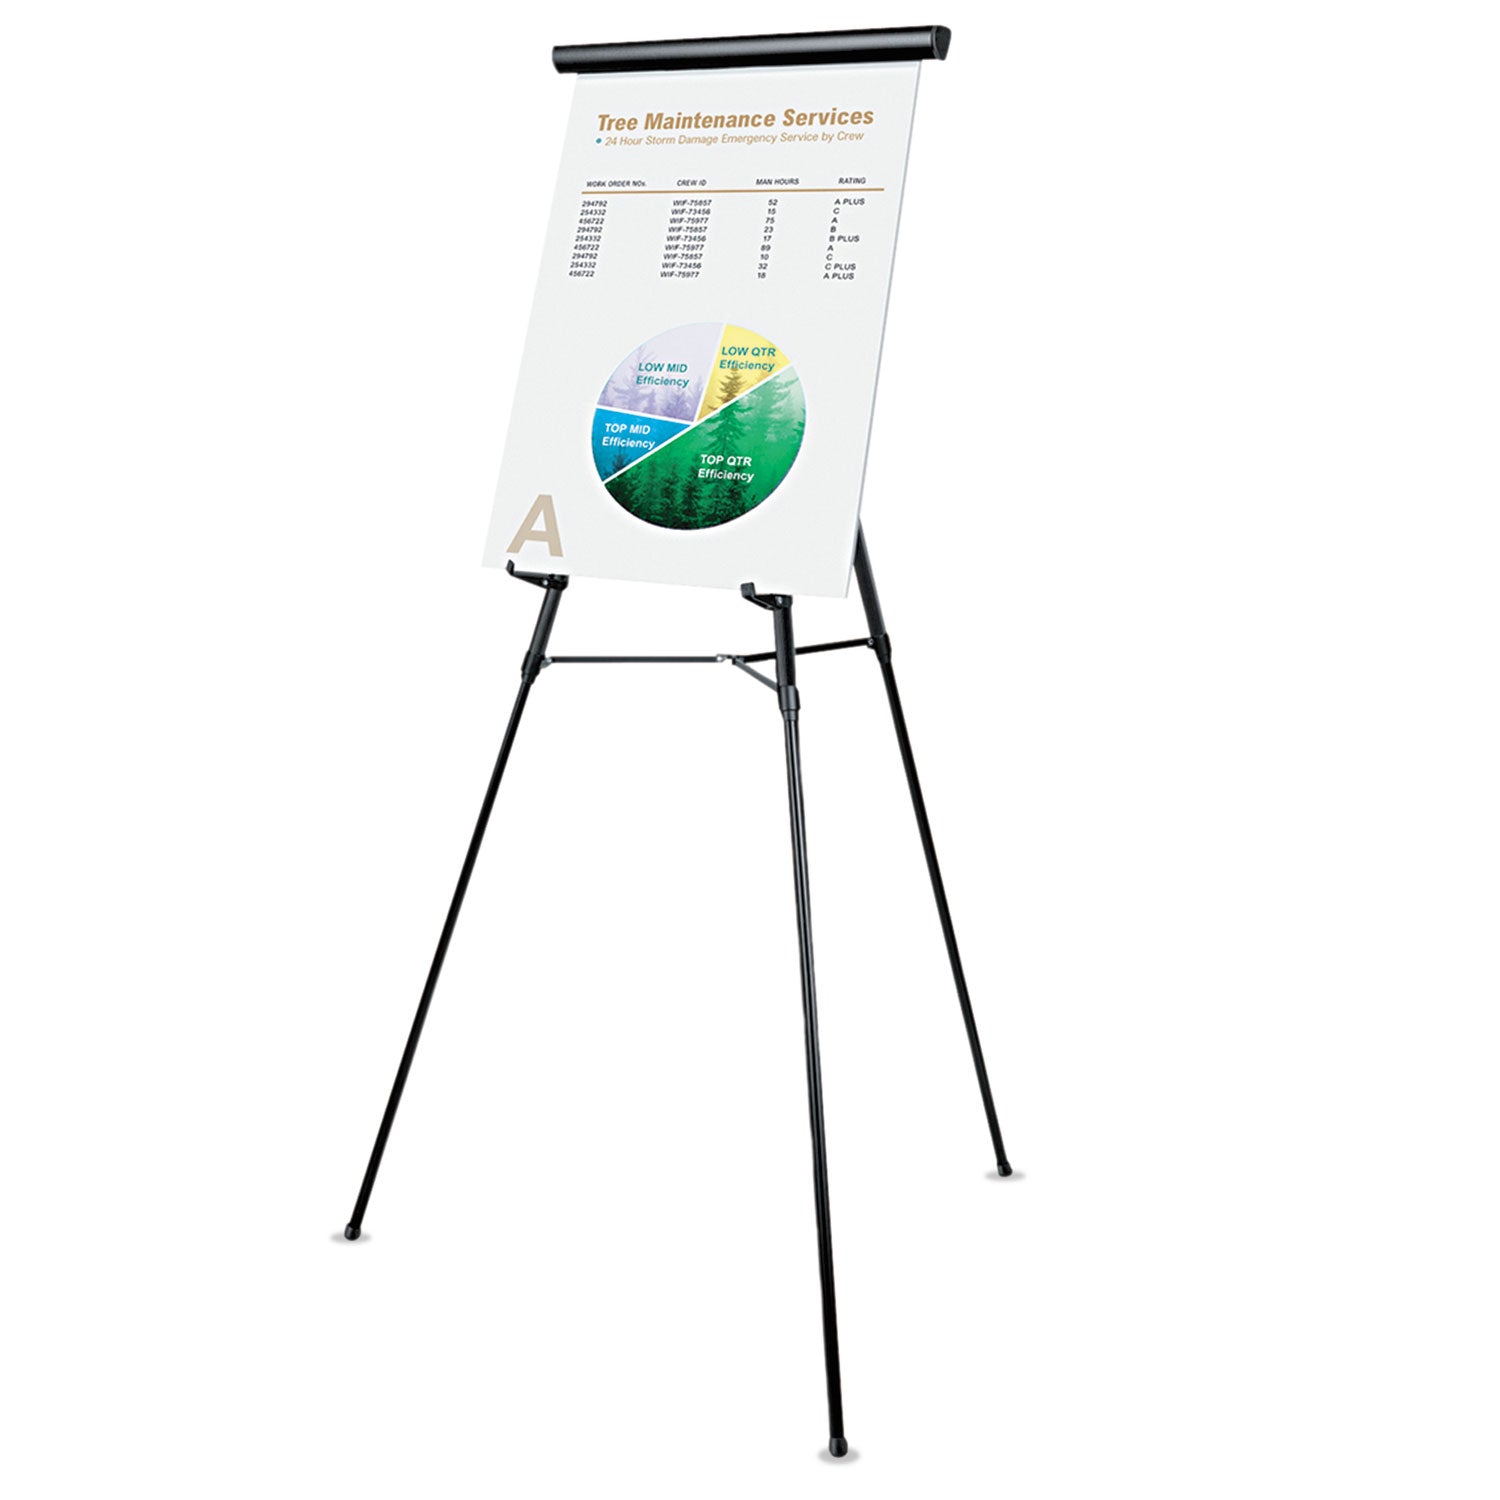 3-Leg Telescoping Easel with Pad Retainer, Adjusts 34" to 64", Aluminum, Black - 